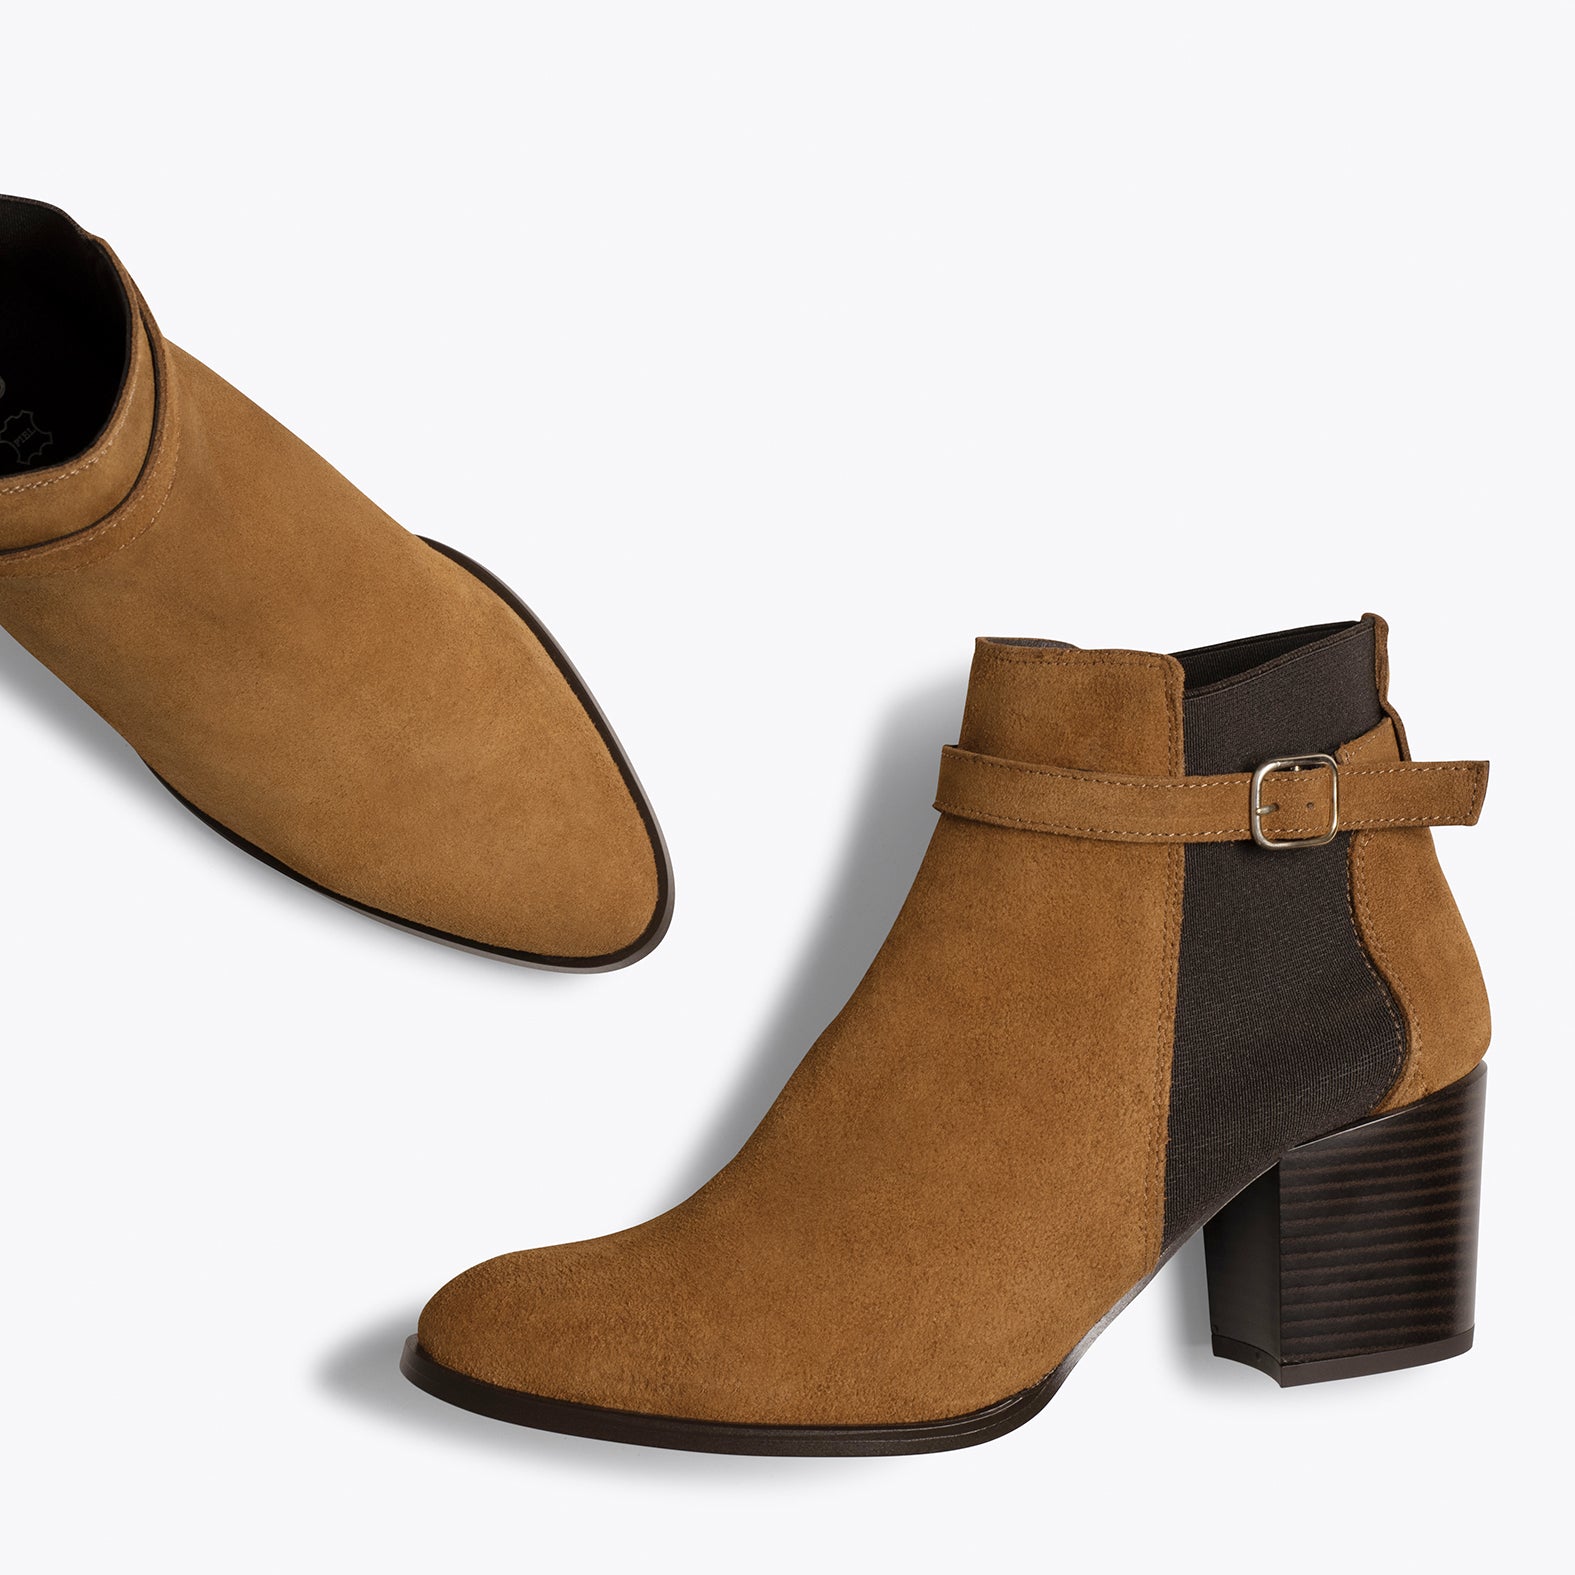 ELASTIC – CAMEL bootie with elastic side bands